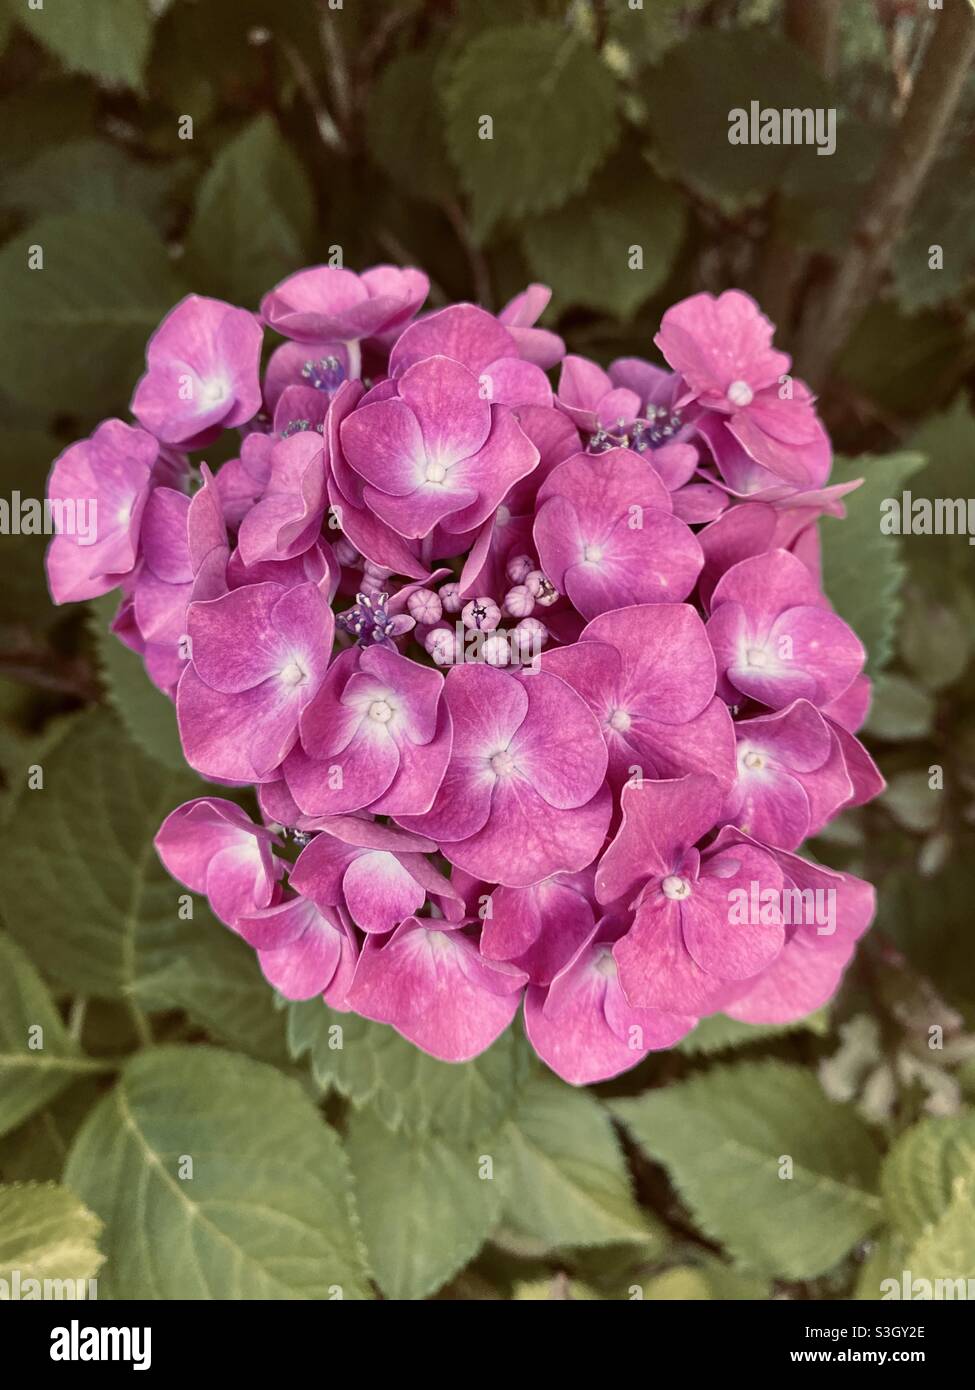 Beautiful texture of red flowers blooming nature photography. Pink Bigleaf hydrangea (hydrangea macrophylla). Stock Photo